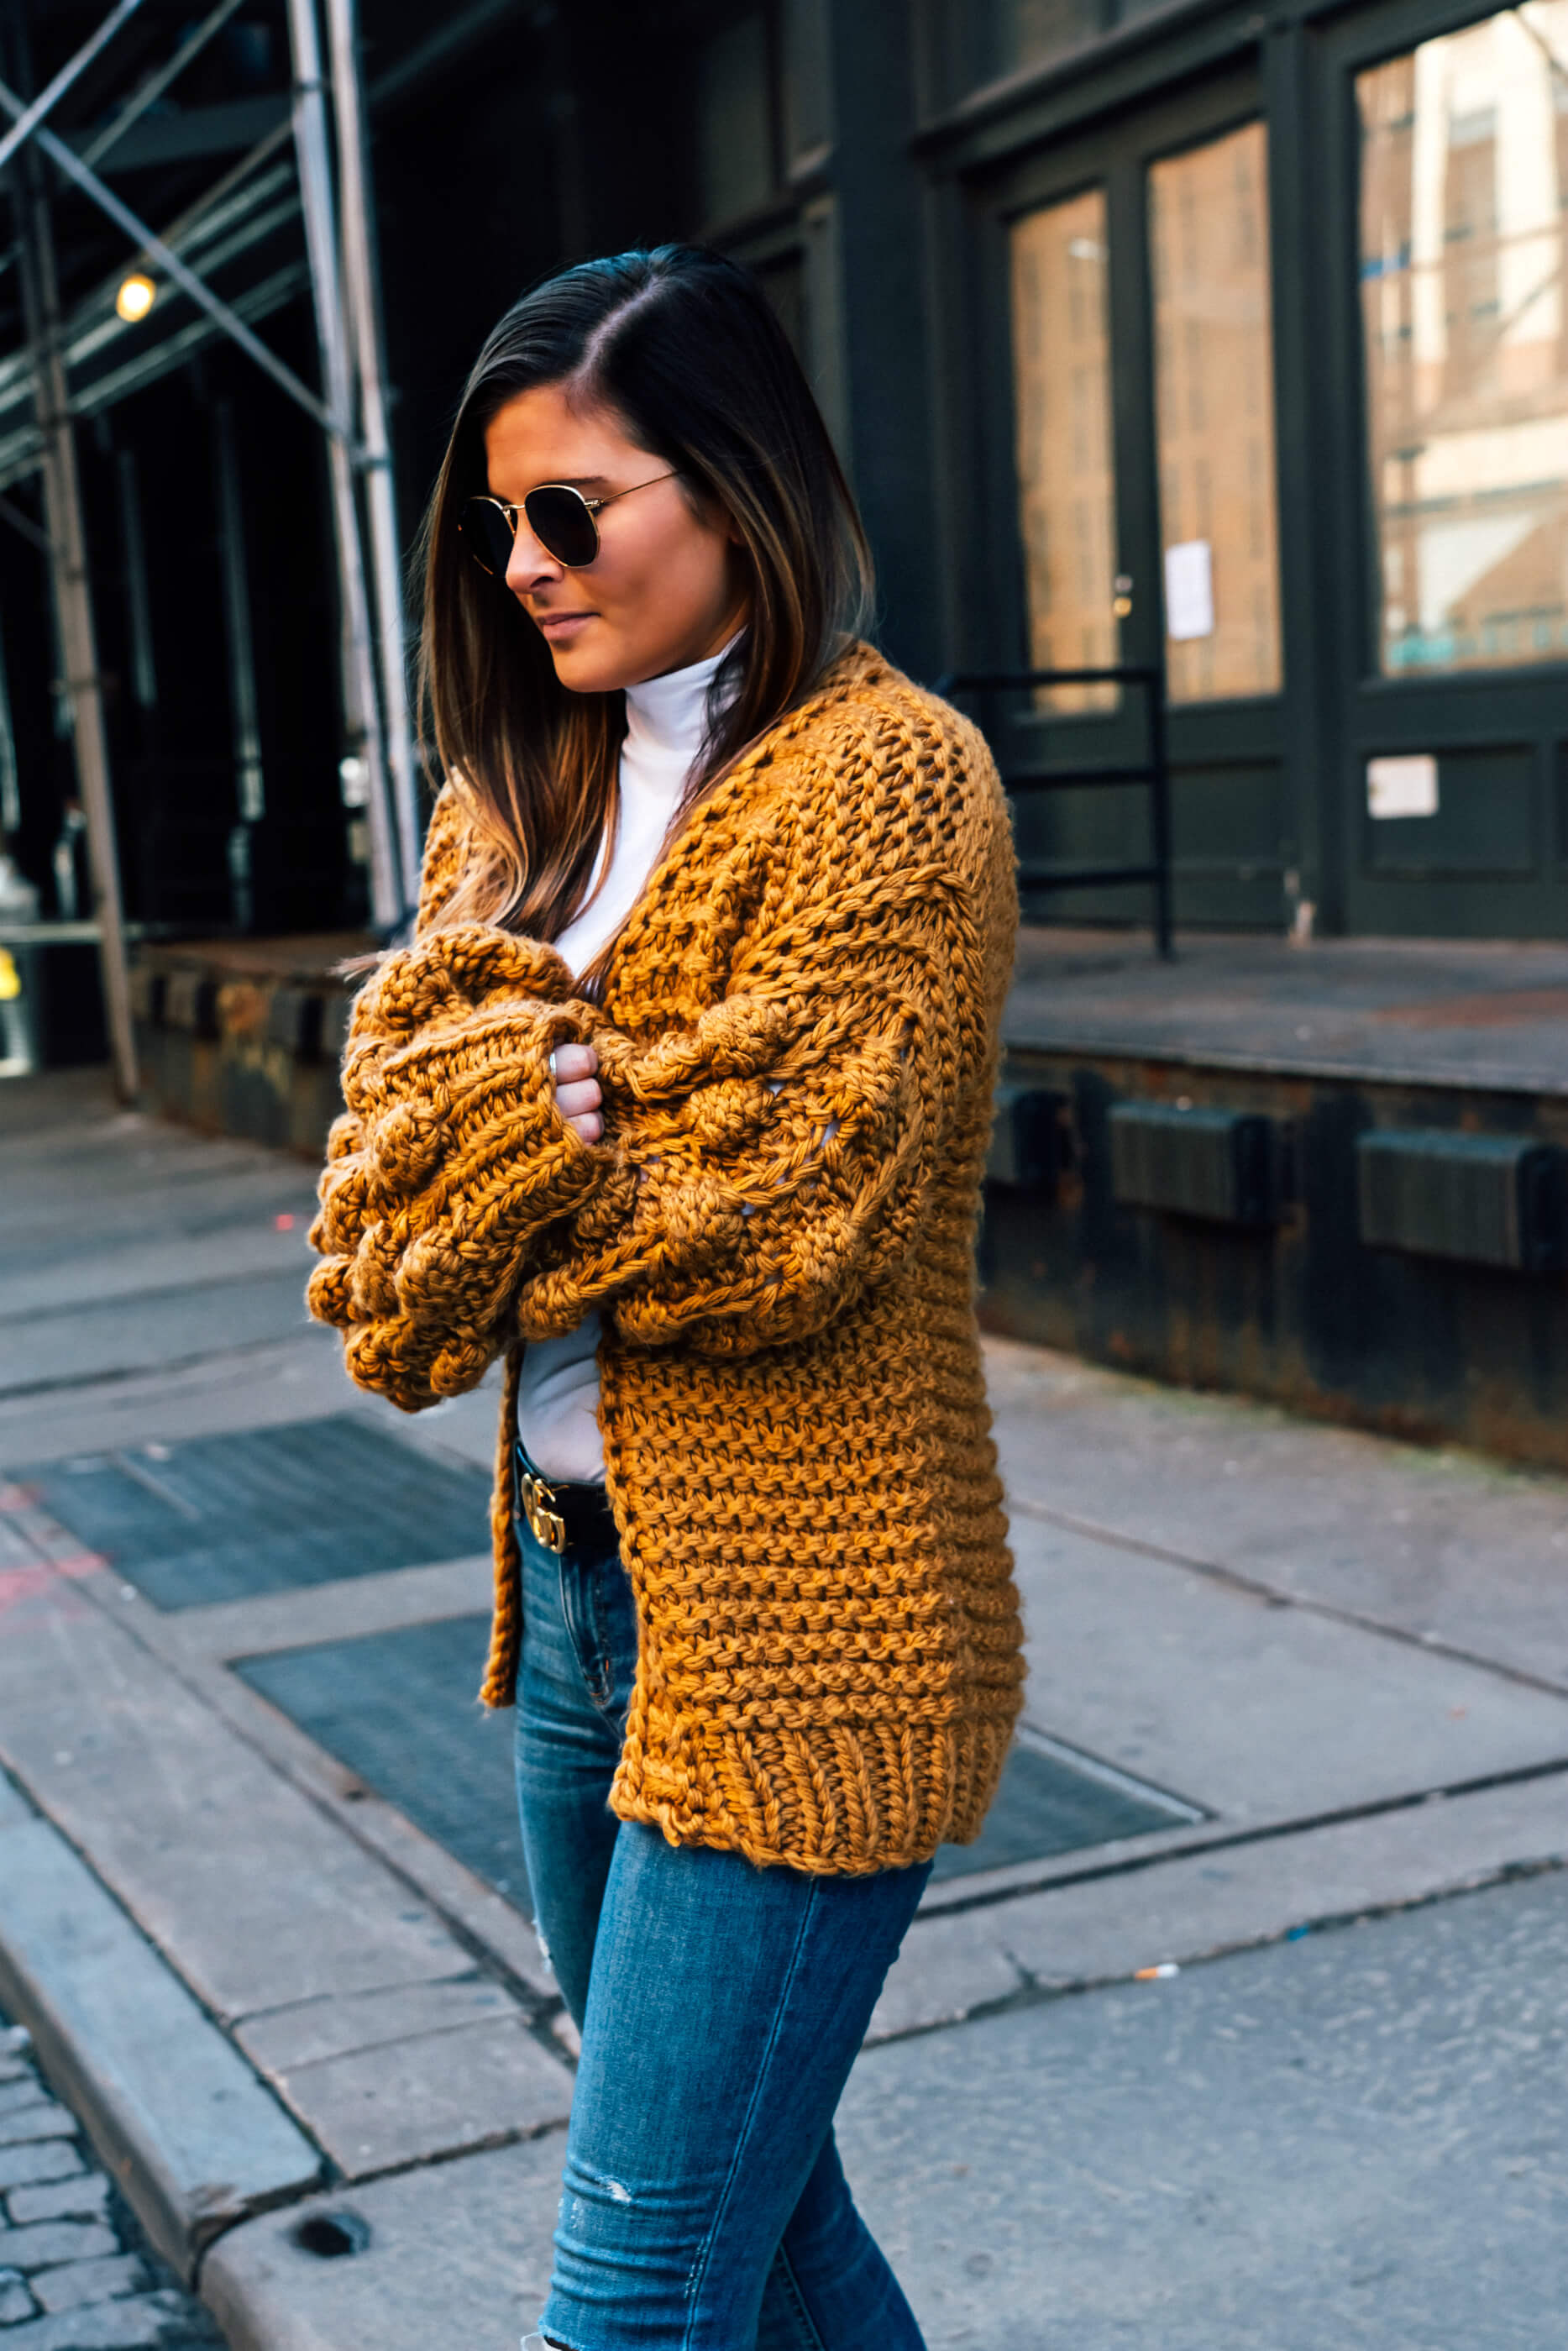 Transition Season: Cardigan Outerwear - To Be Bright